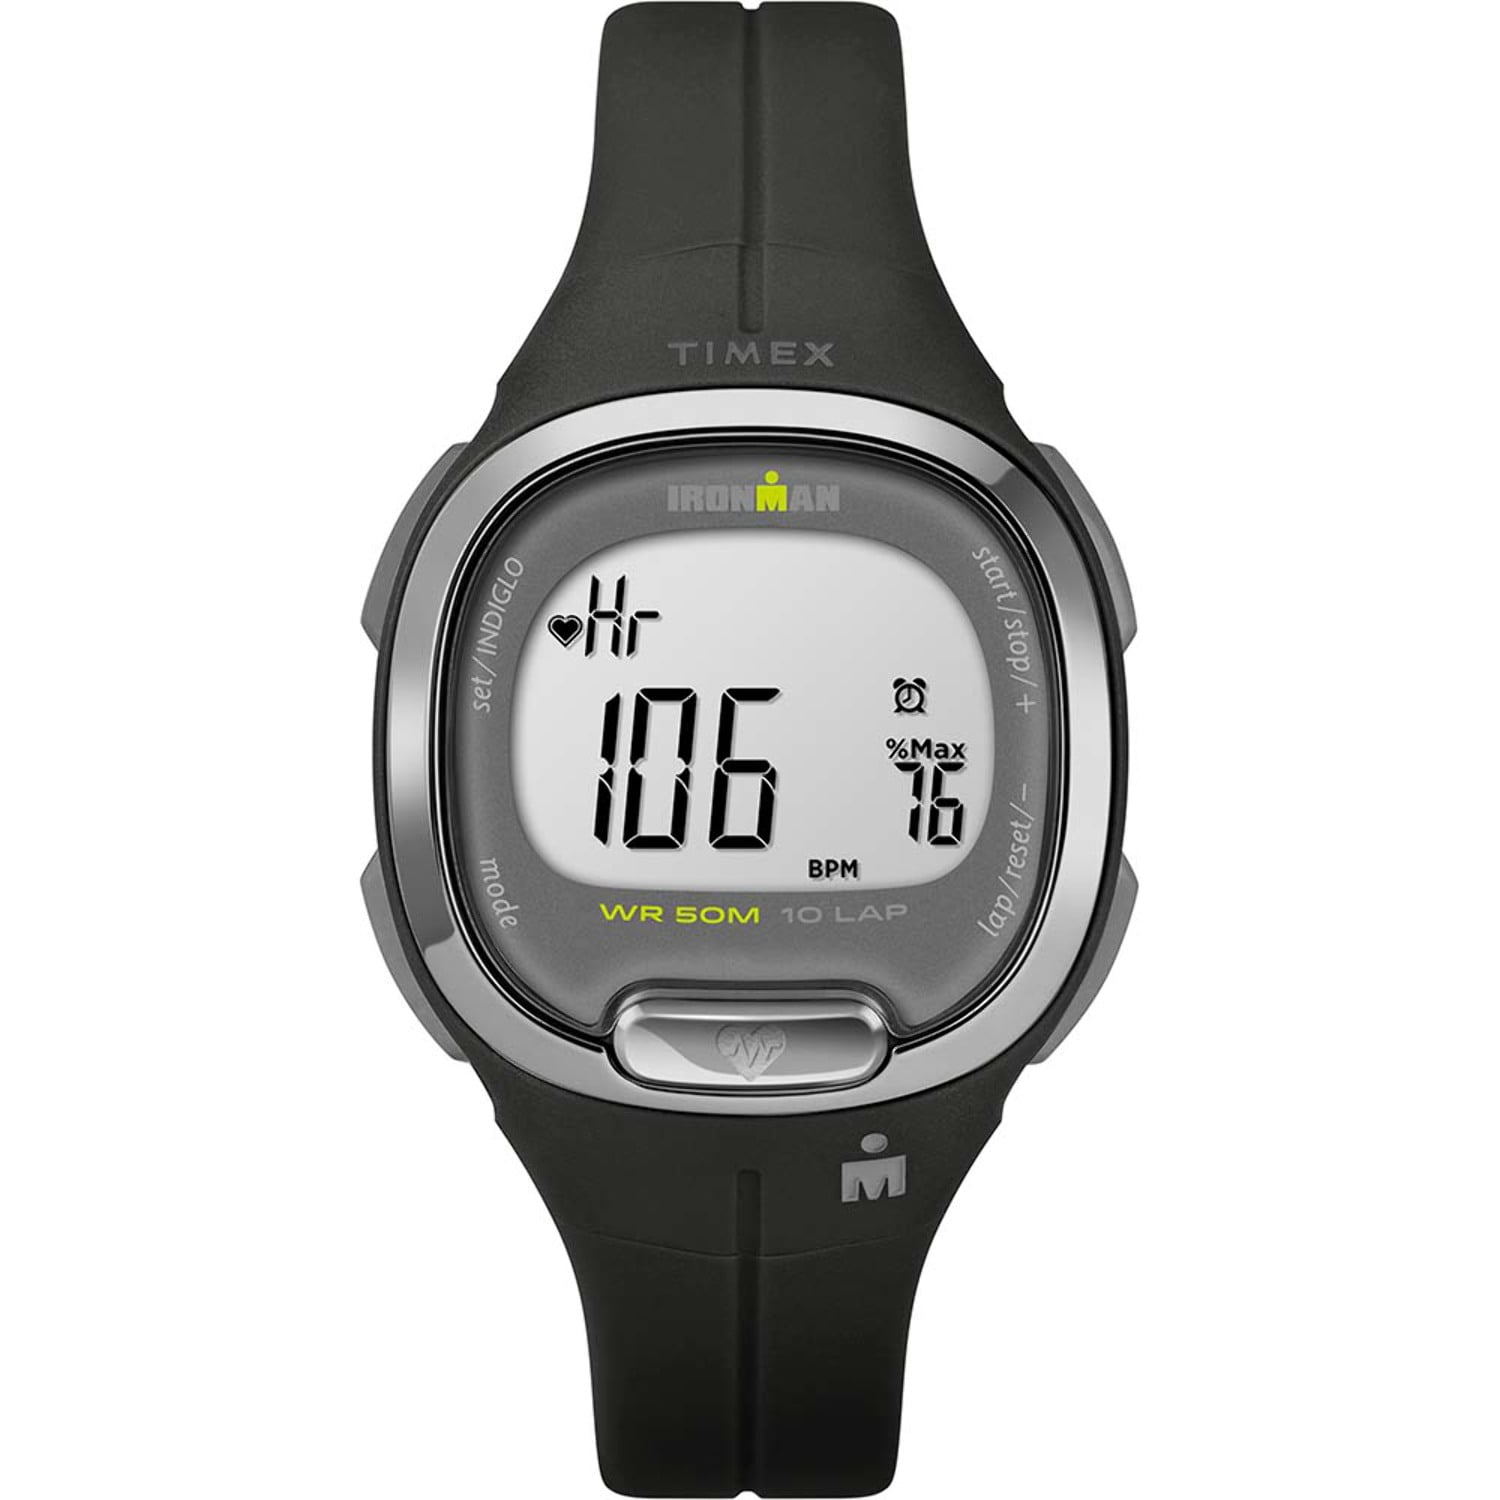 TIMEX IRONMAN Transit+ Watch with Activity Tracking & Heart Rate